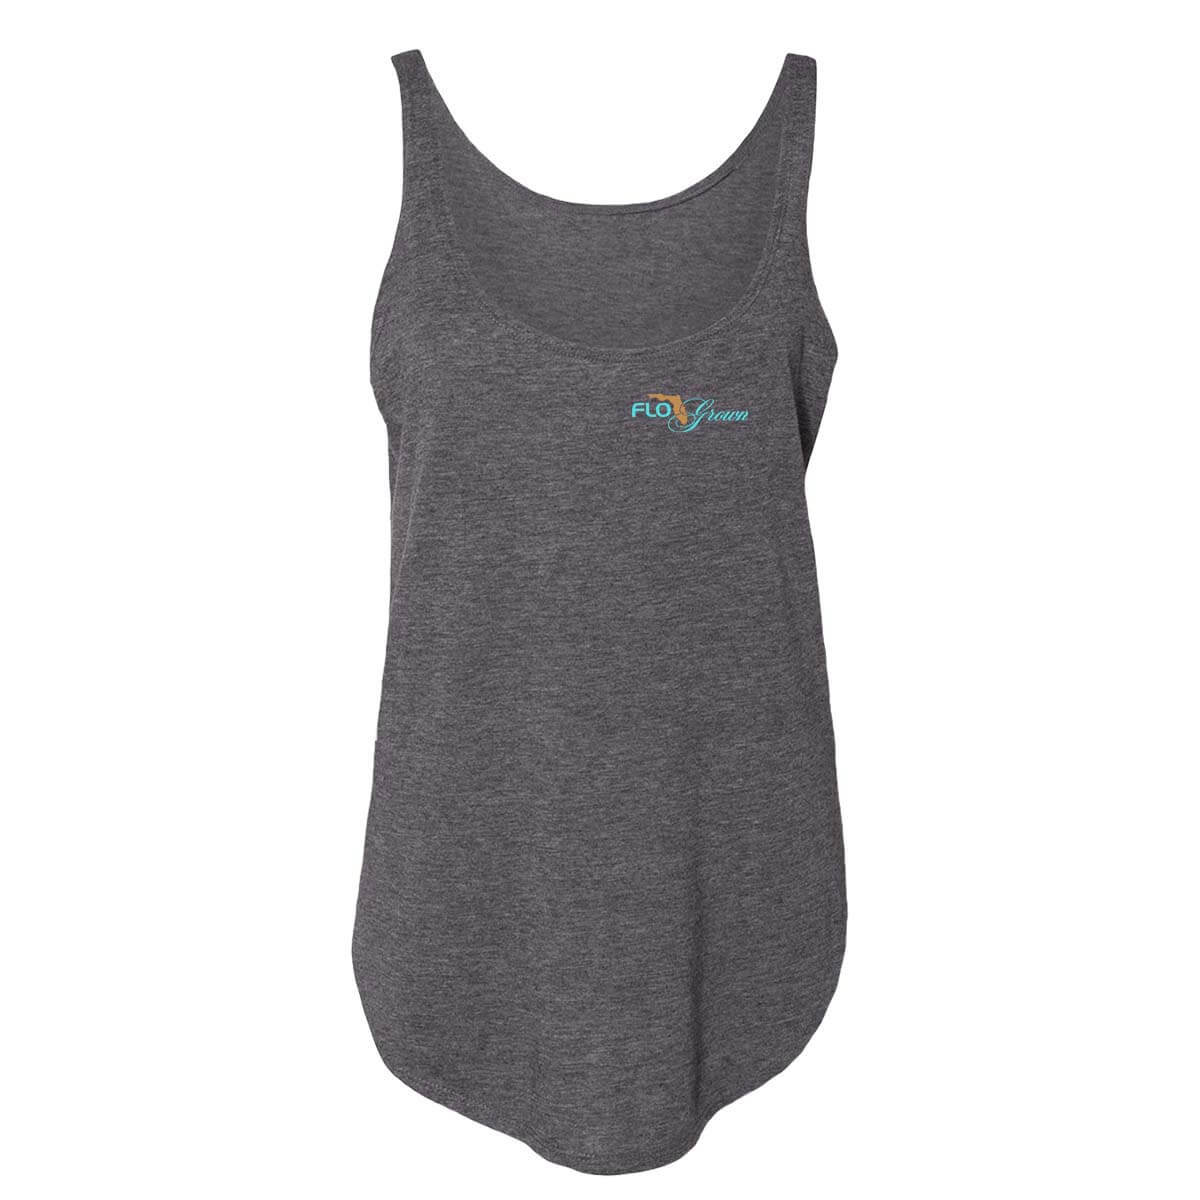 Home on the Waves Women's Tank